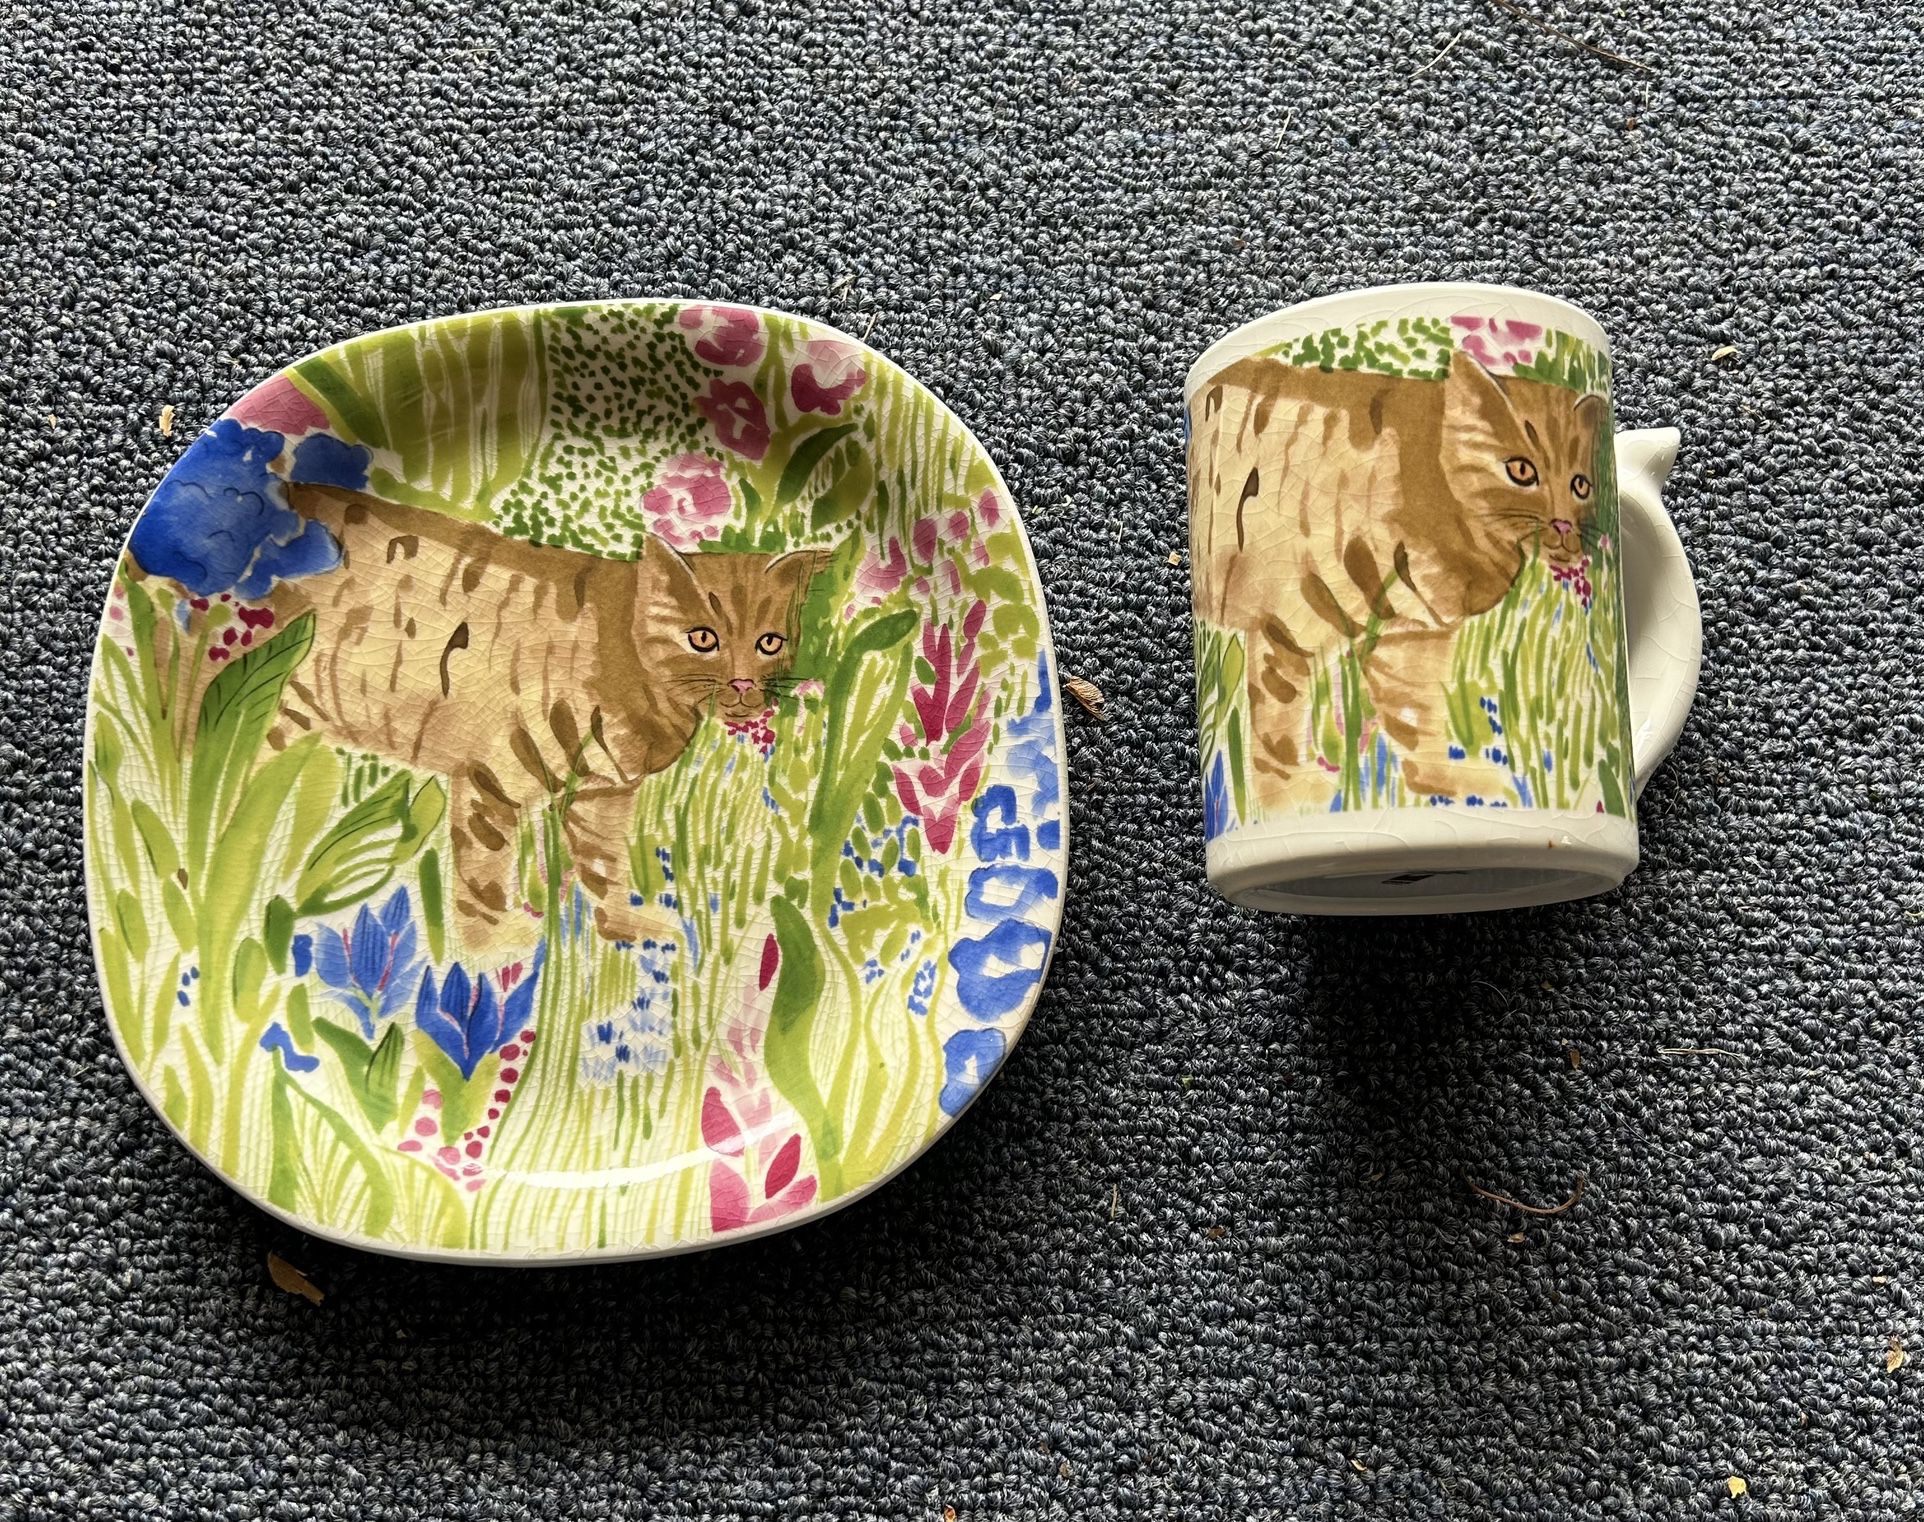 Colorful Collectible Cat Motif Plate And Mug By Minor-Etta’s